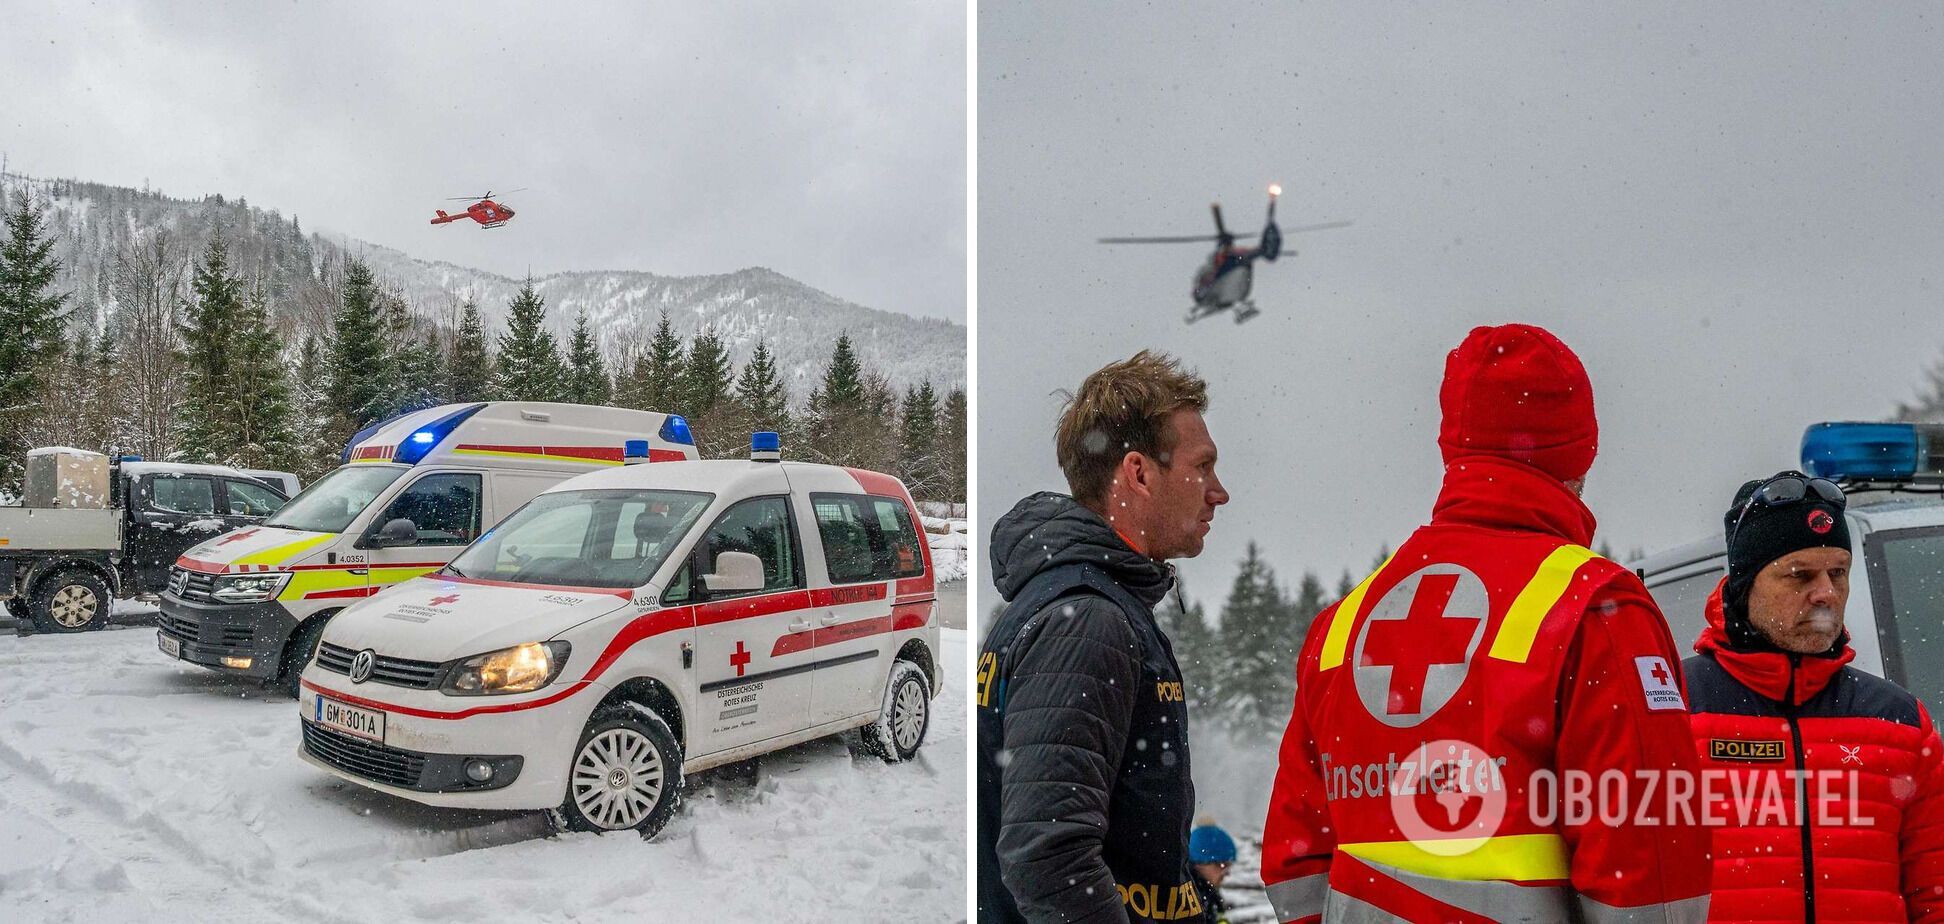 A private plane crashed in Austria: no one survived. Photo